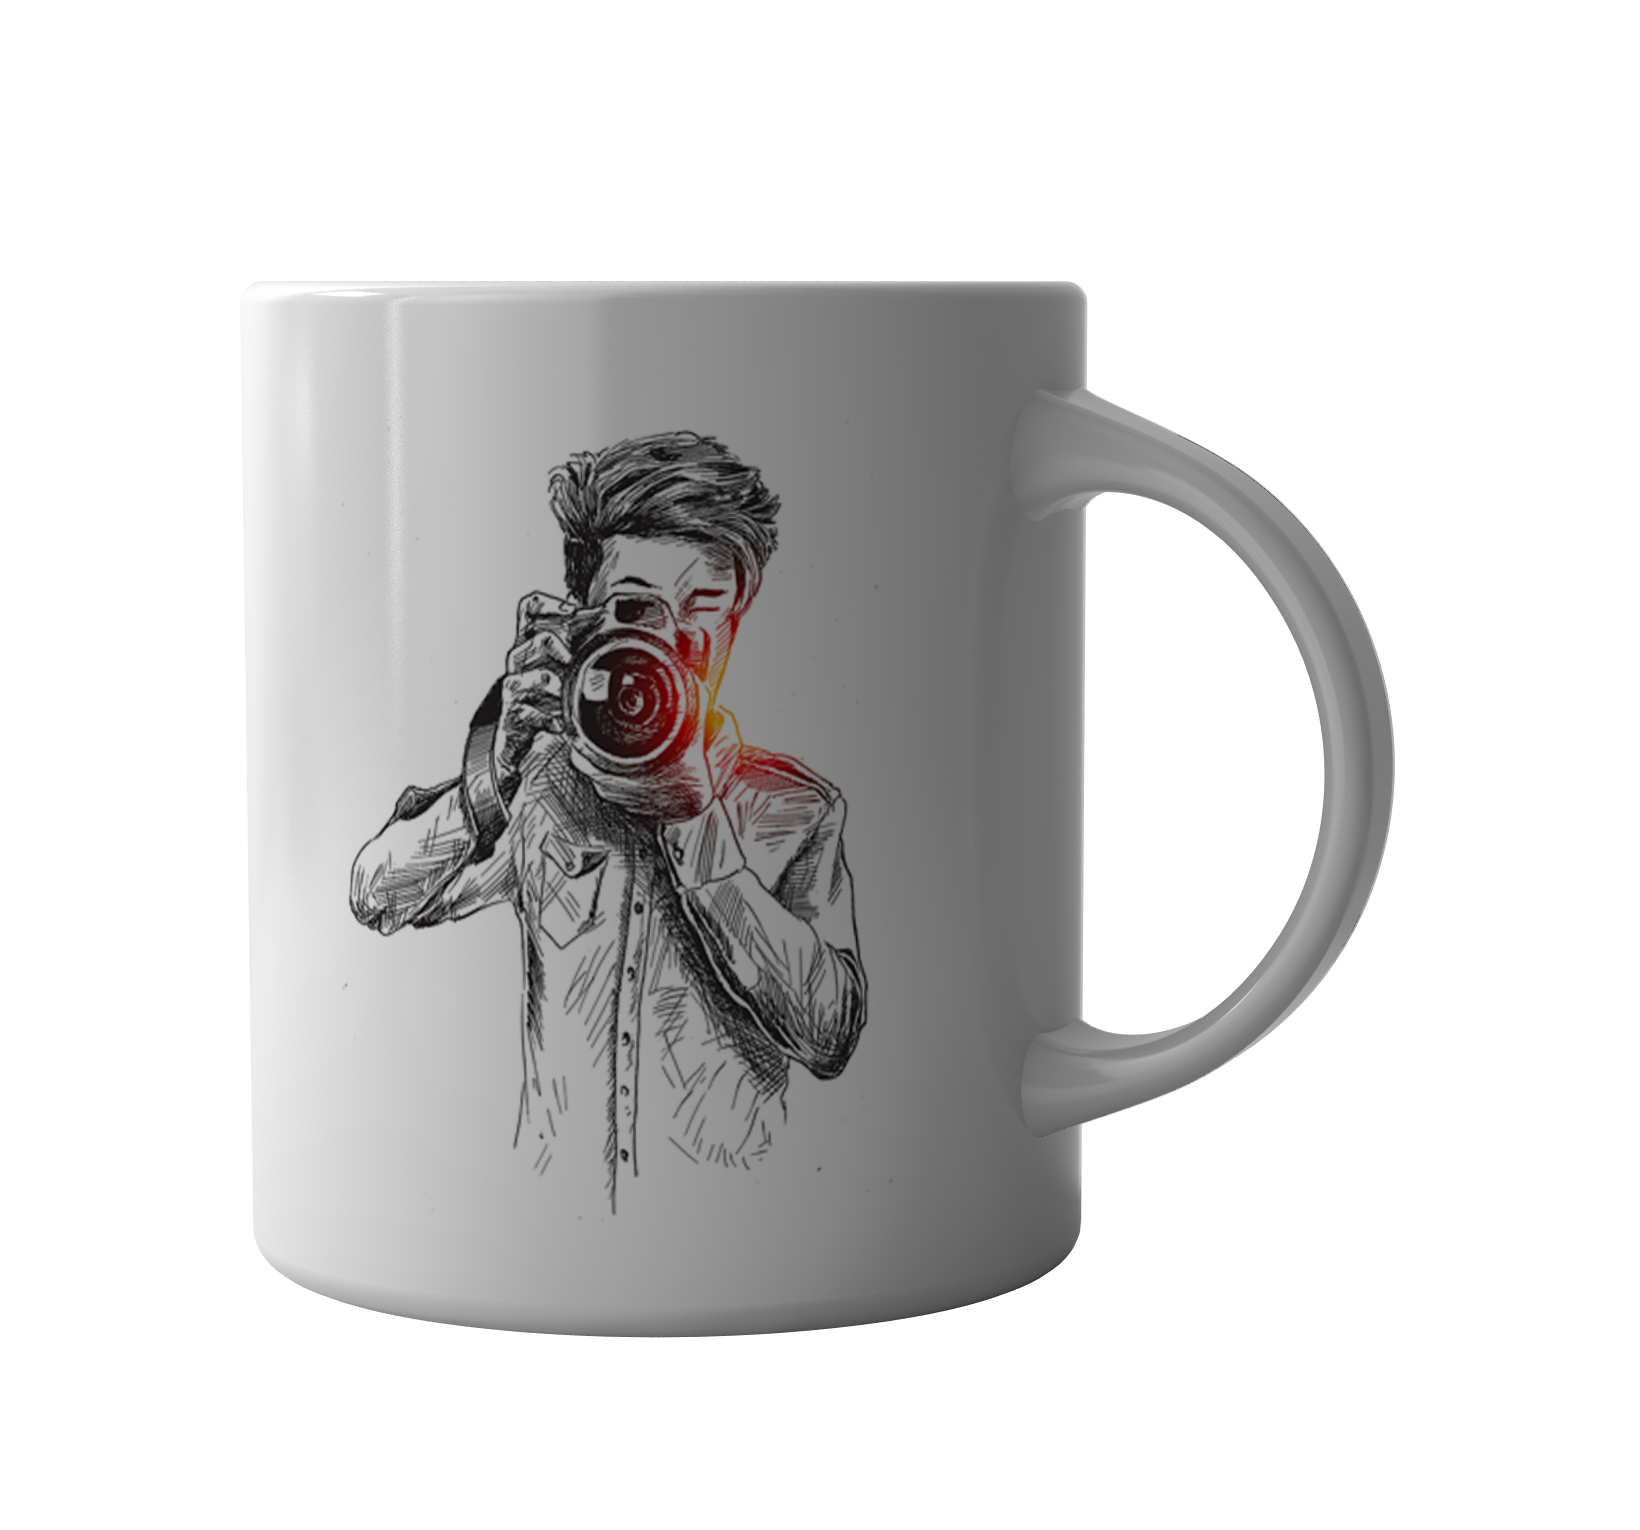 Customized And Personalized Coffee Mug With Photo